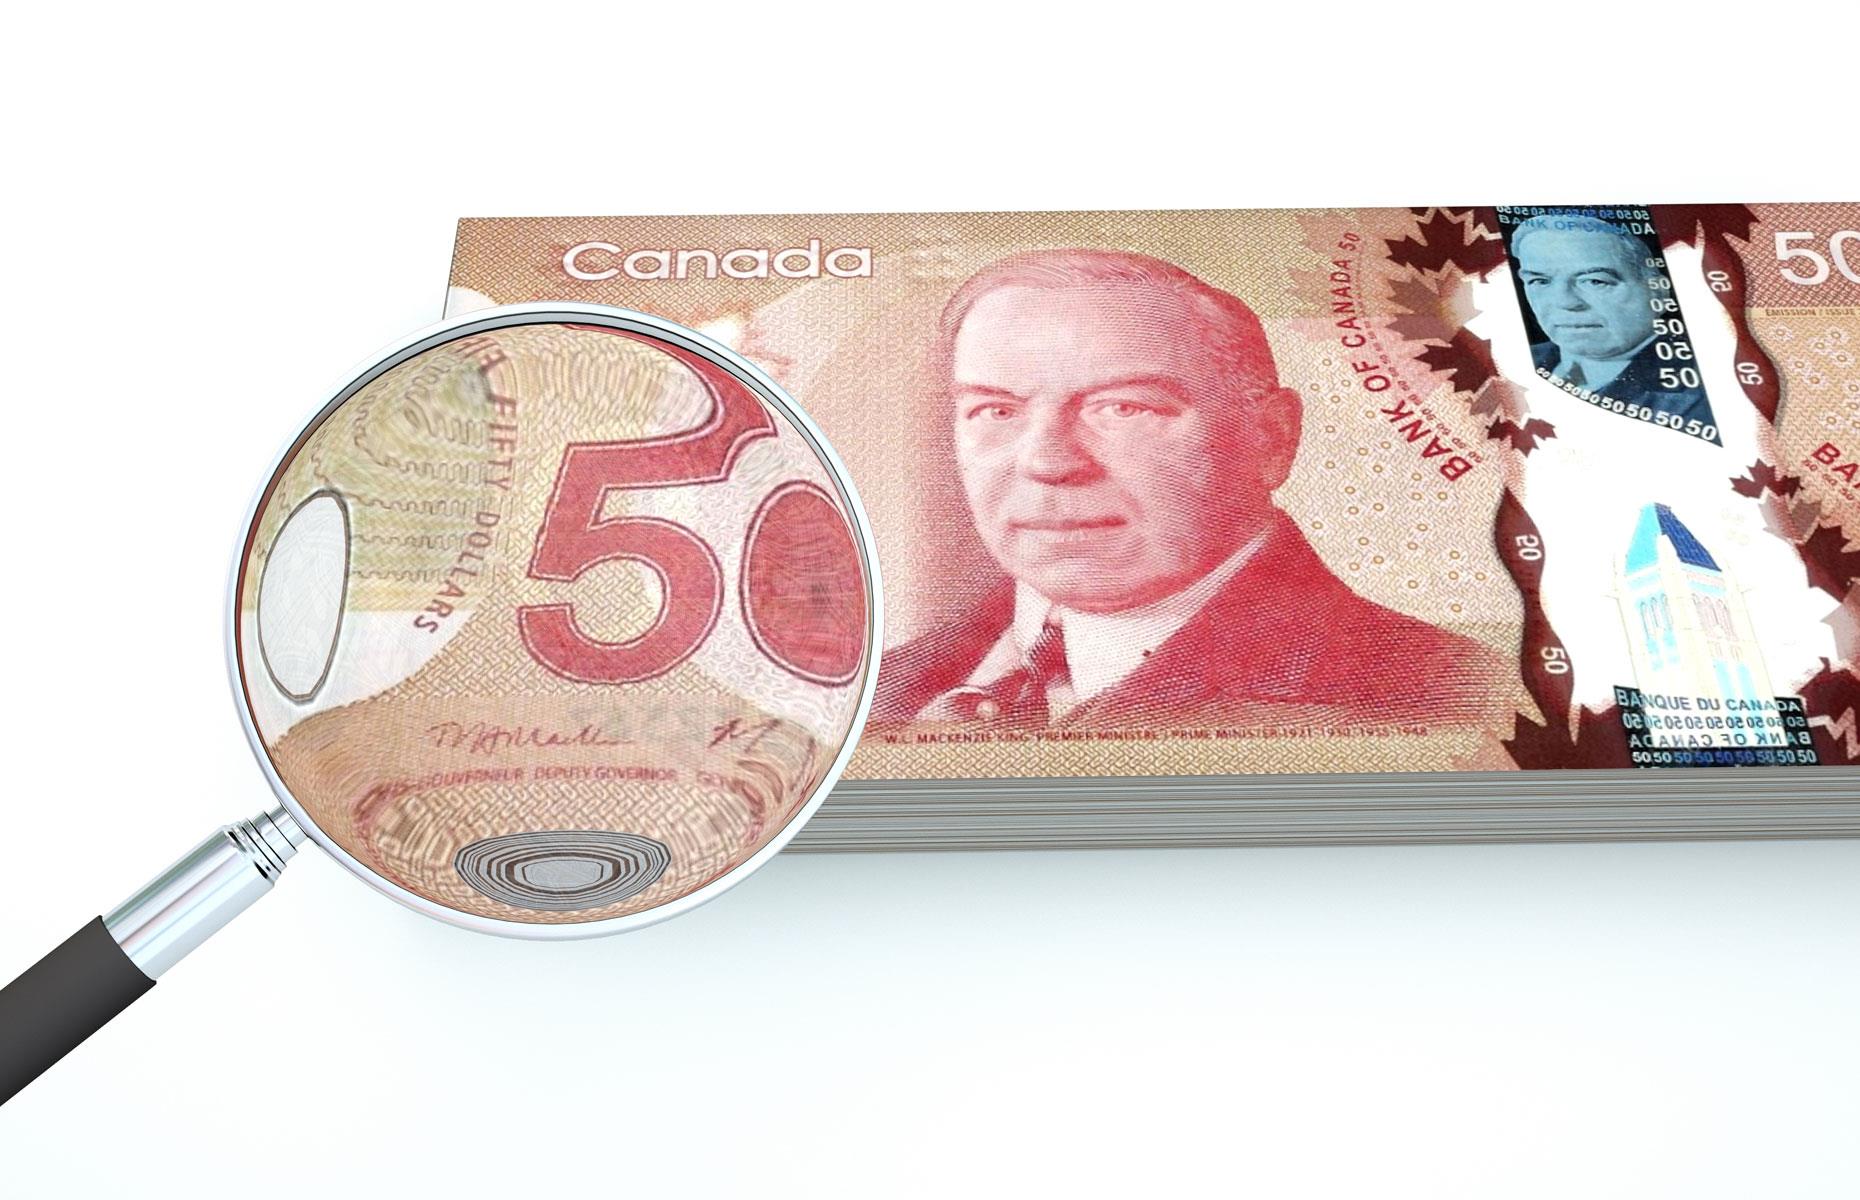 Australian and Canadian banknotes are also made with animal fat